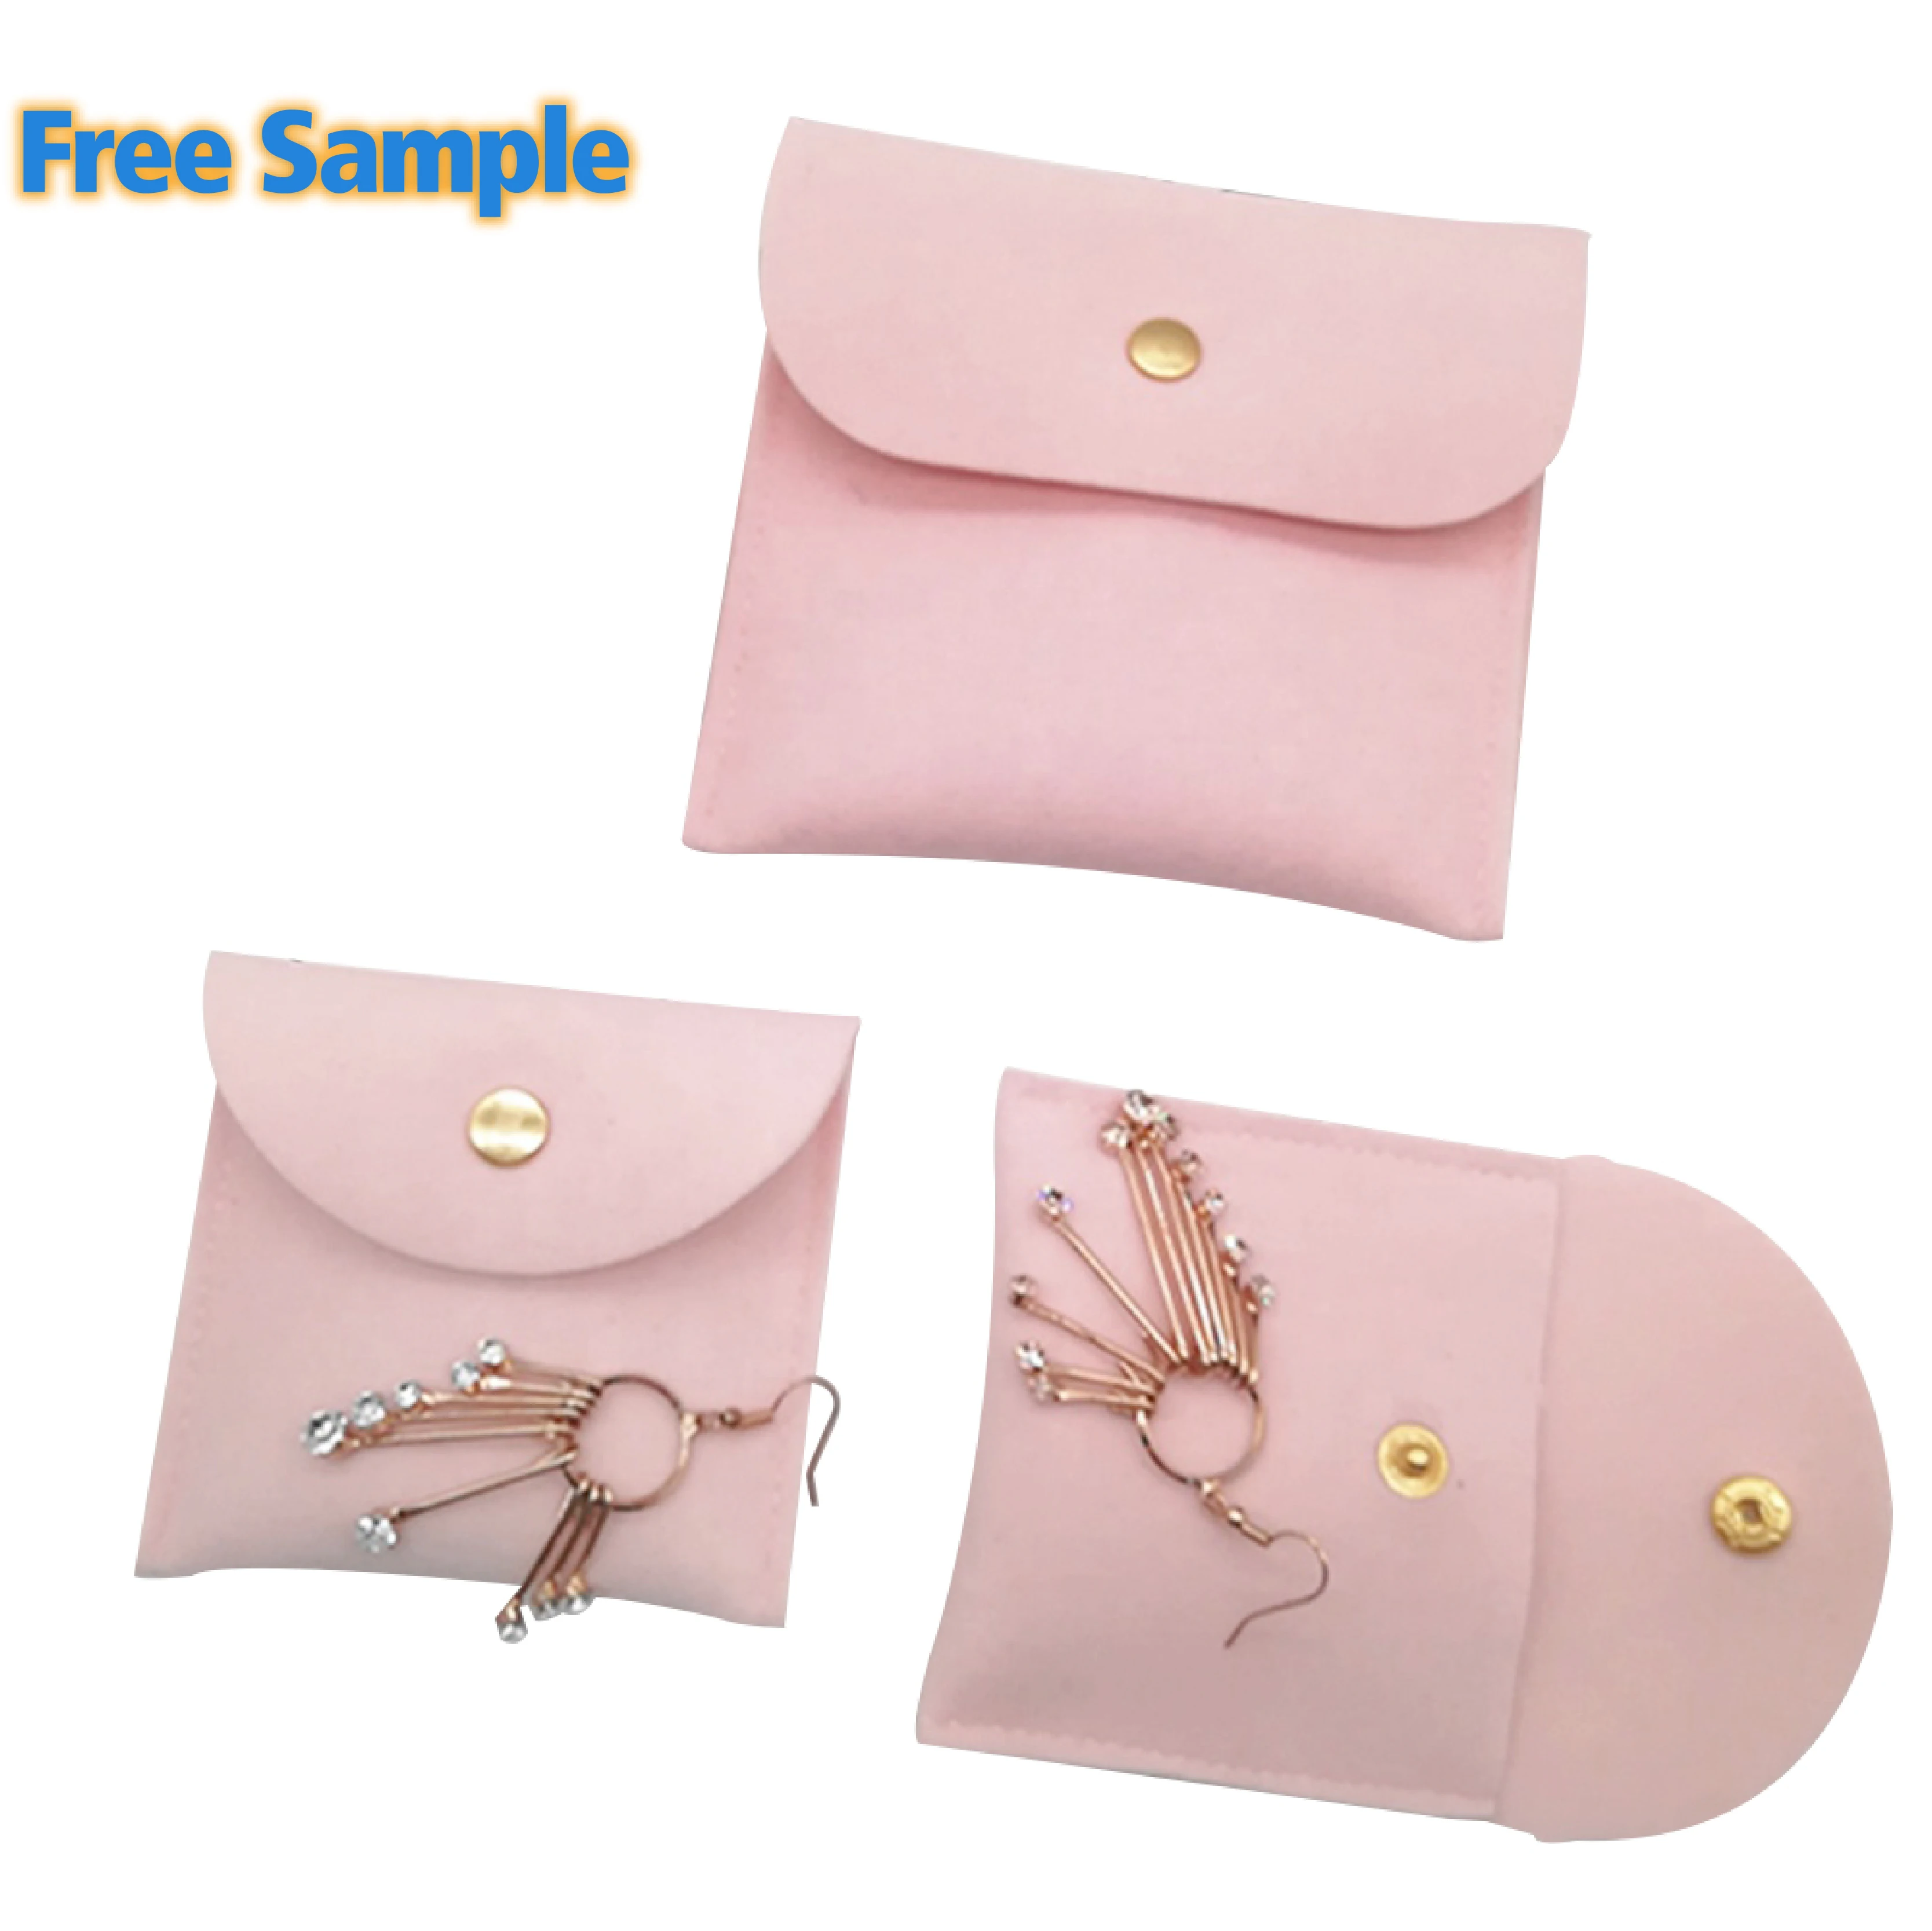 

Hot sale 10*10 pink mini suede jewelry packing pouch for jewelry storage with button logo printed custom jewelry bag, Black, blue, green, grey, pink, white, yellow, etc